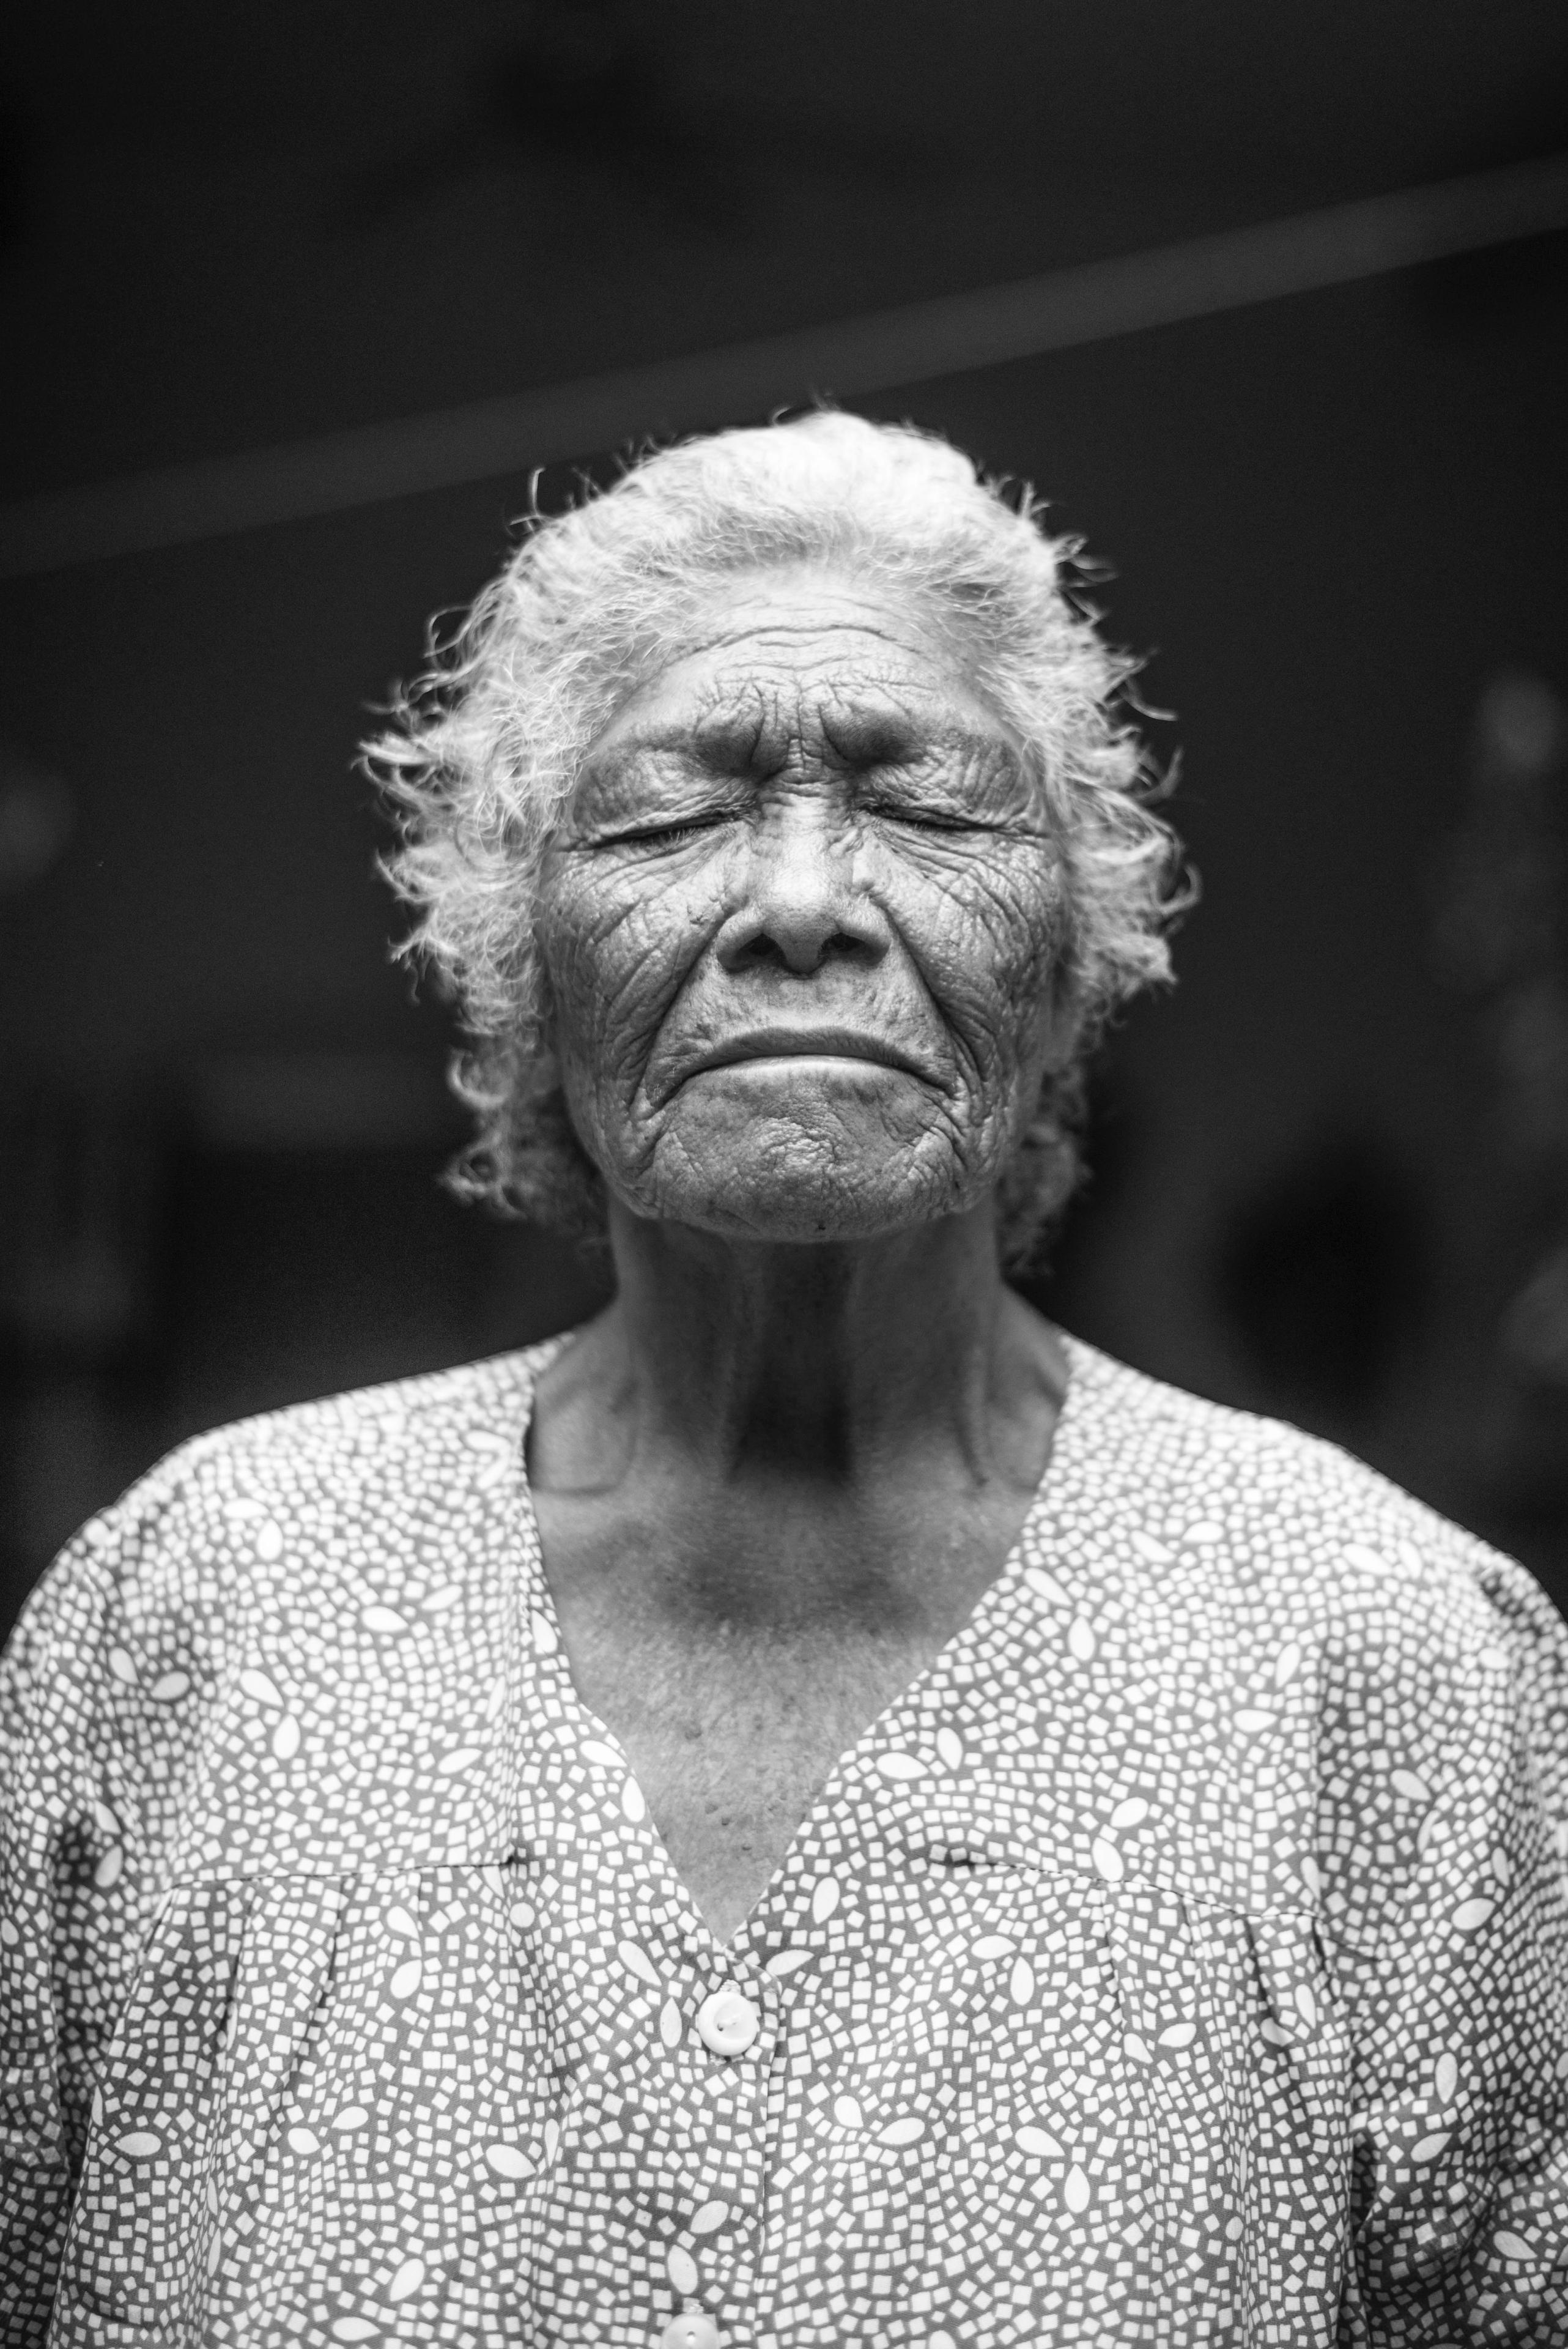 A black-and-white portrait of an older person with a deeply wrinkled face with closed eyes and white hair